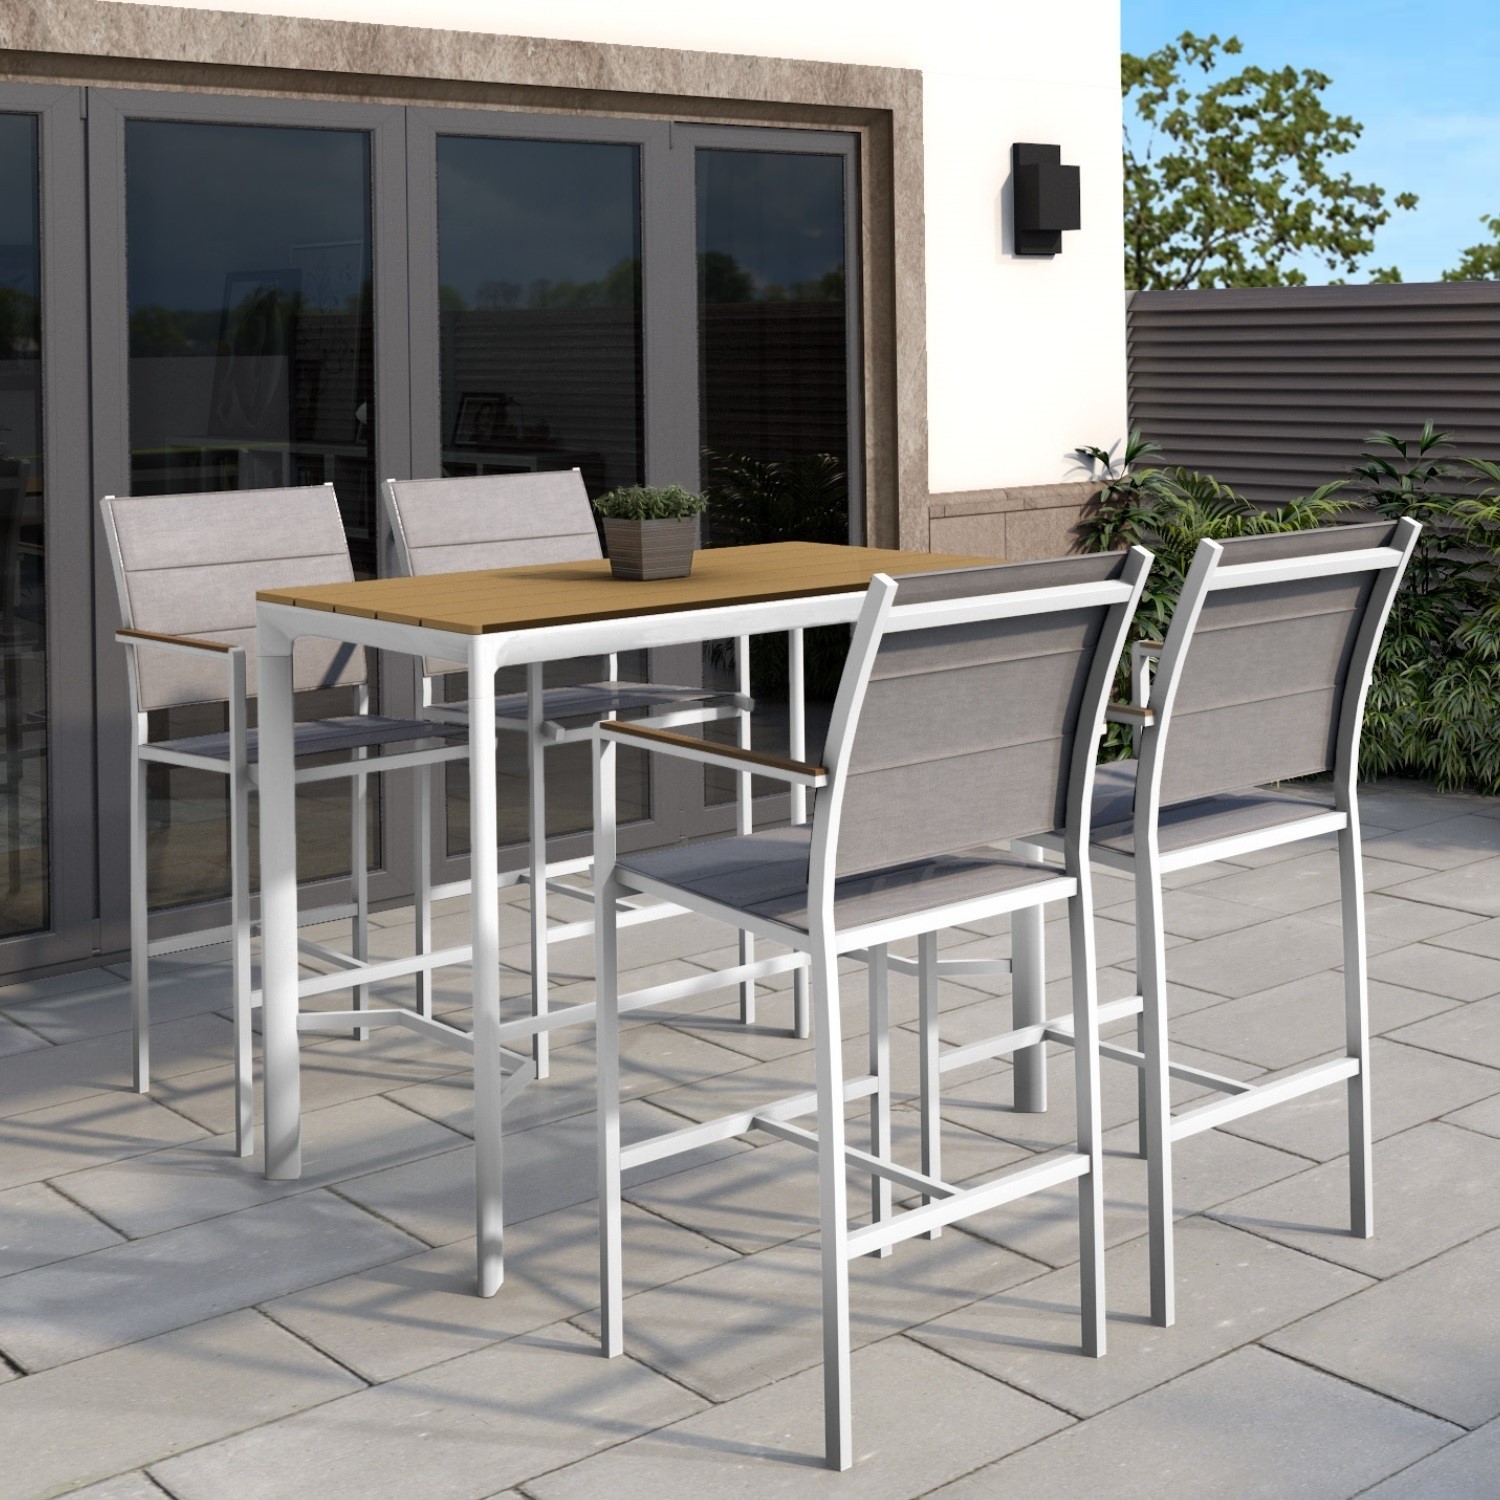 White Outdoor Bar Set With 4 Stools, Outdoor Furniture Bar Stools And Table